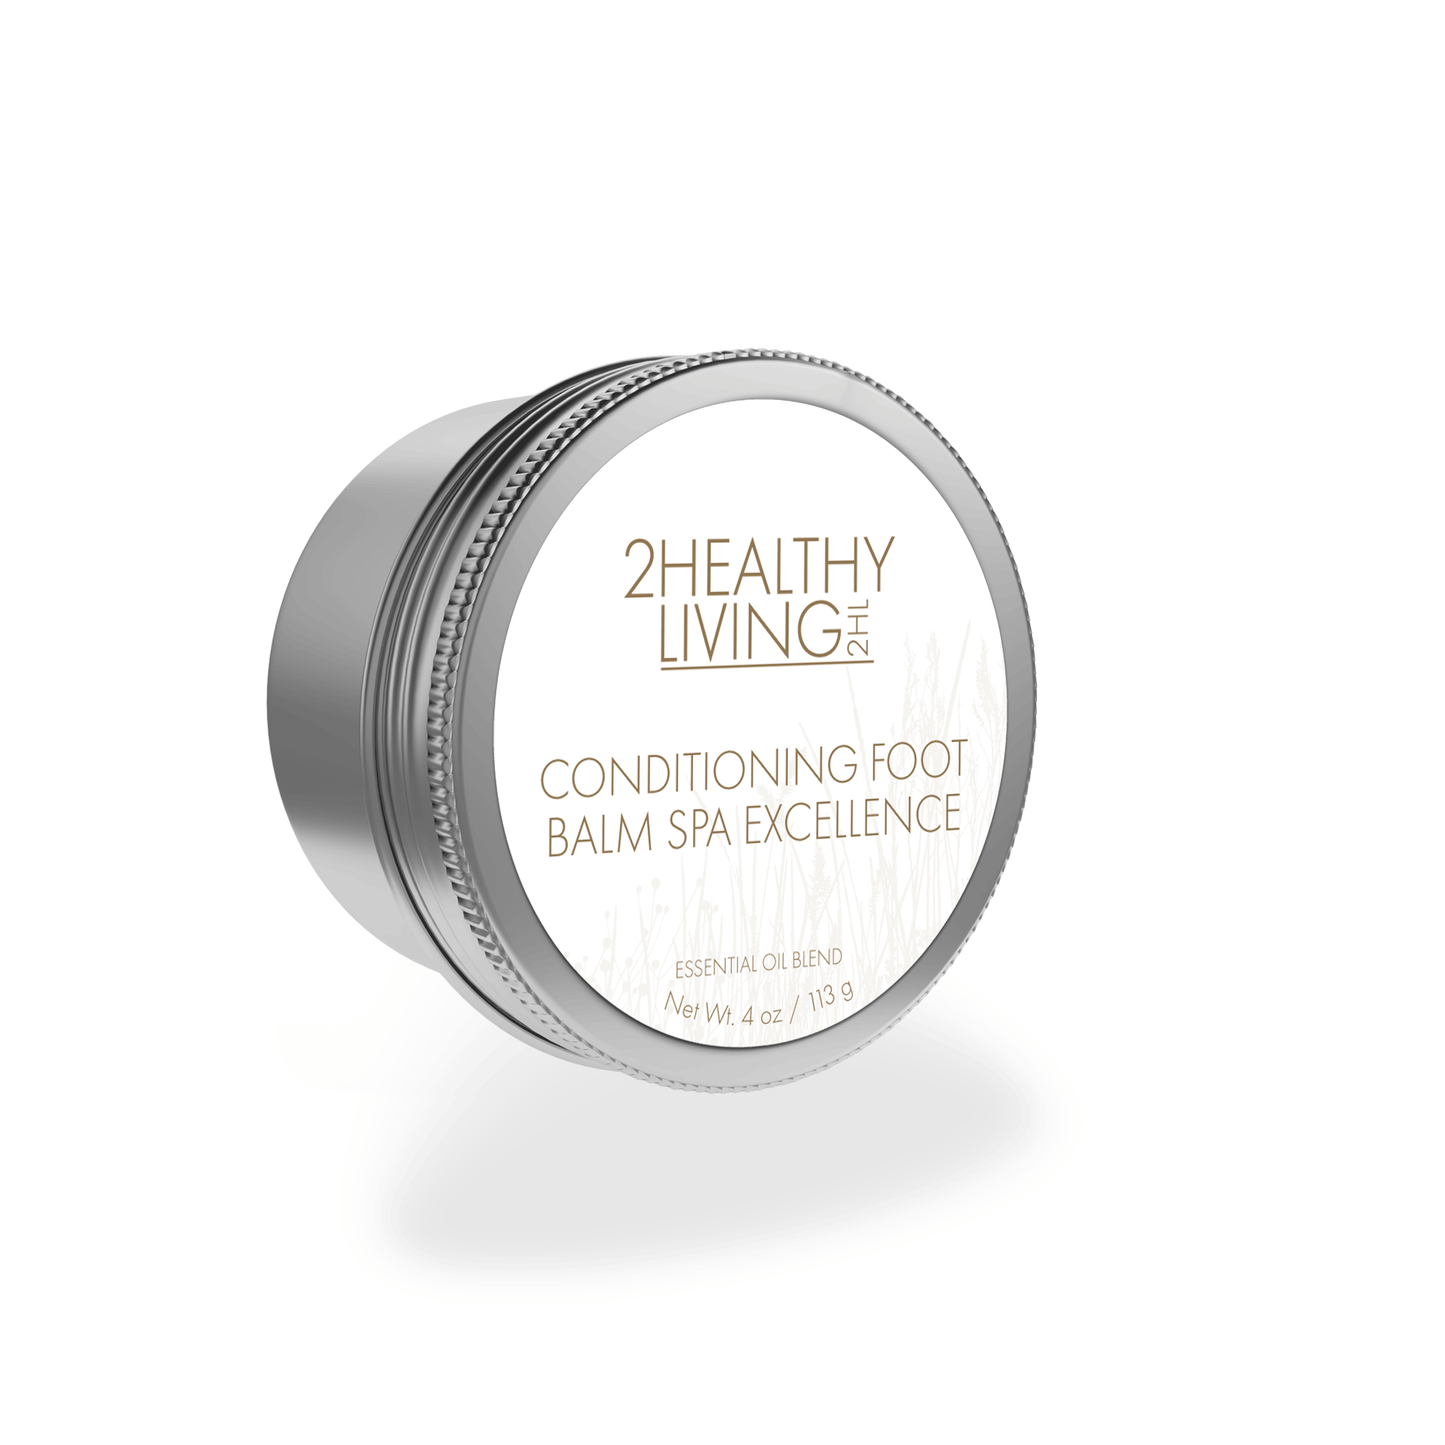 Conditioning Foot Balm Spa Excellence